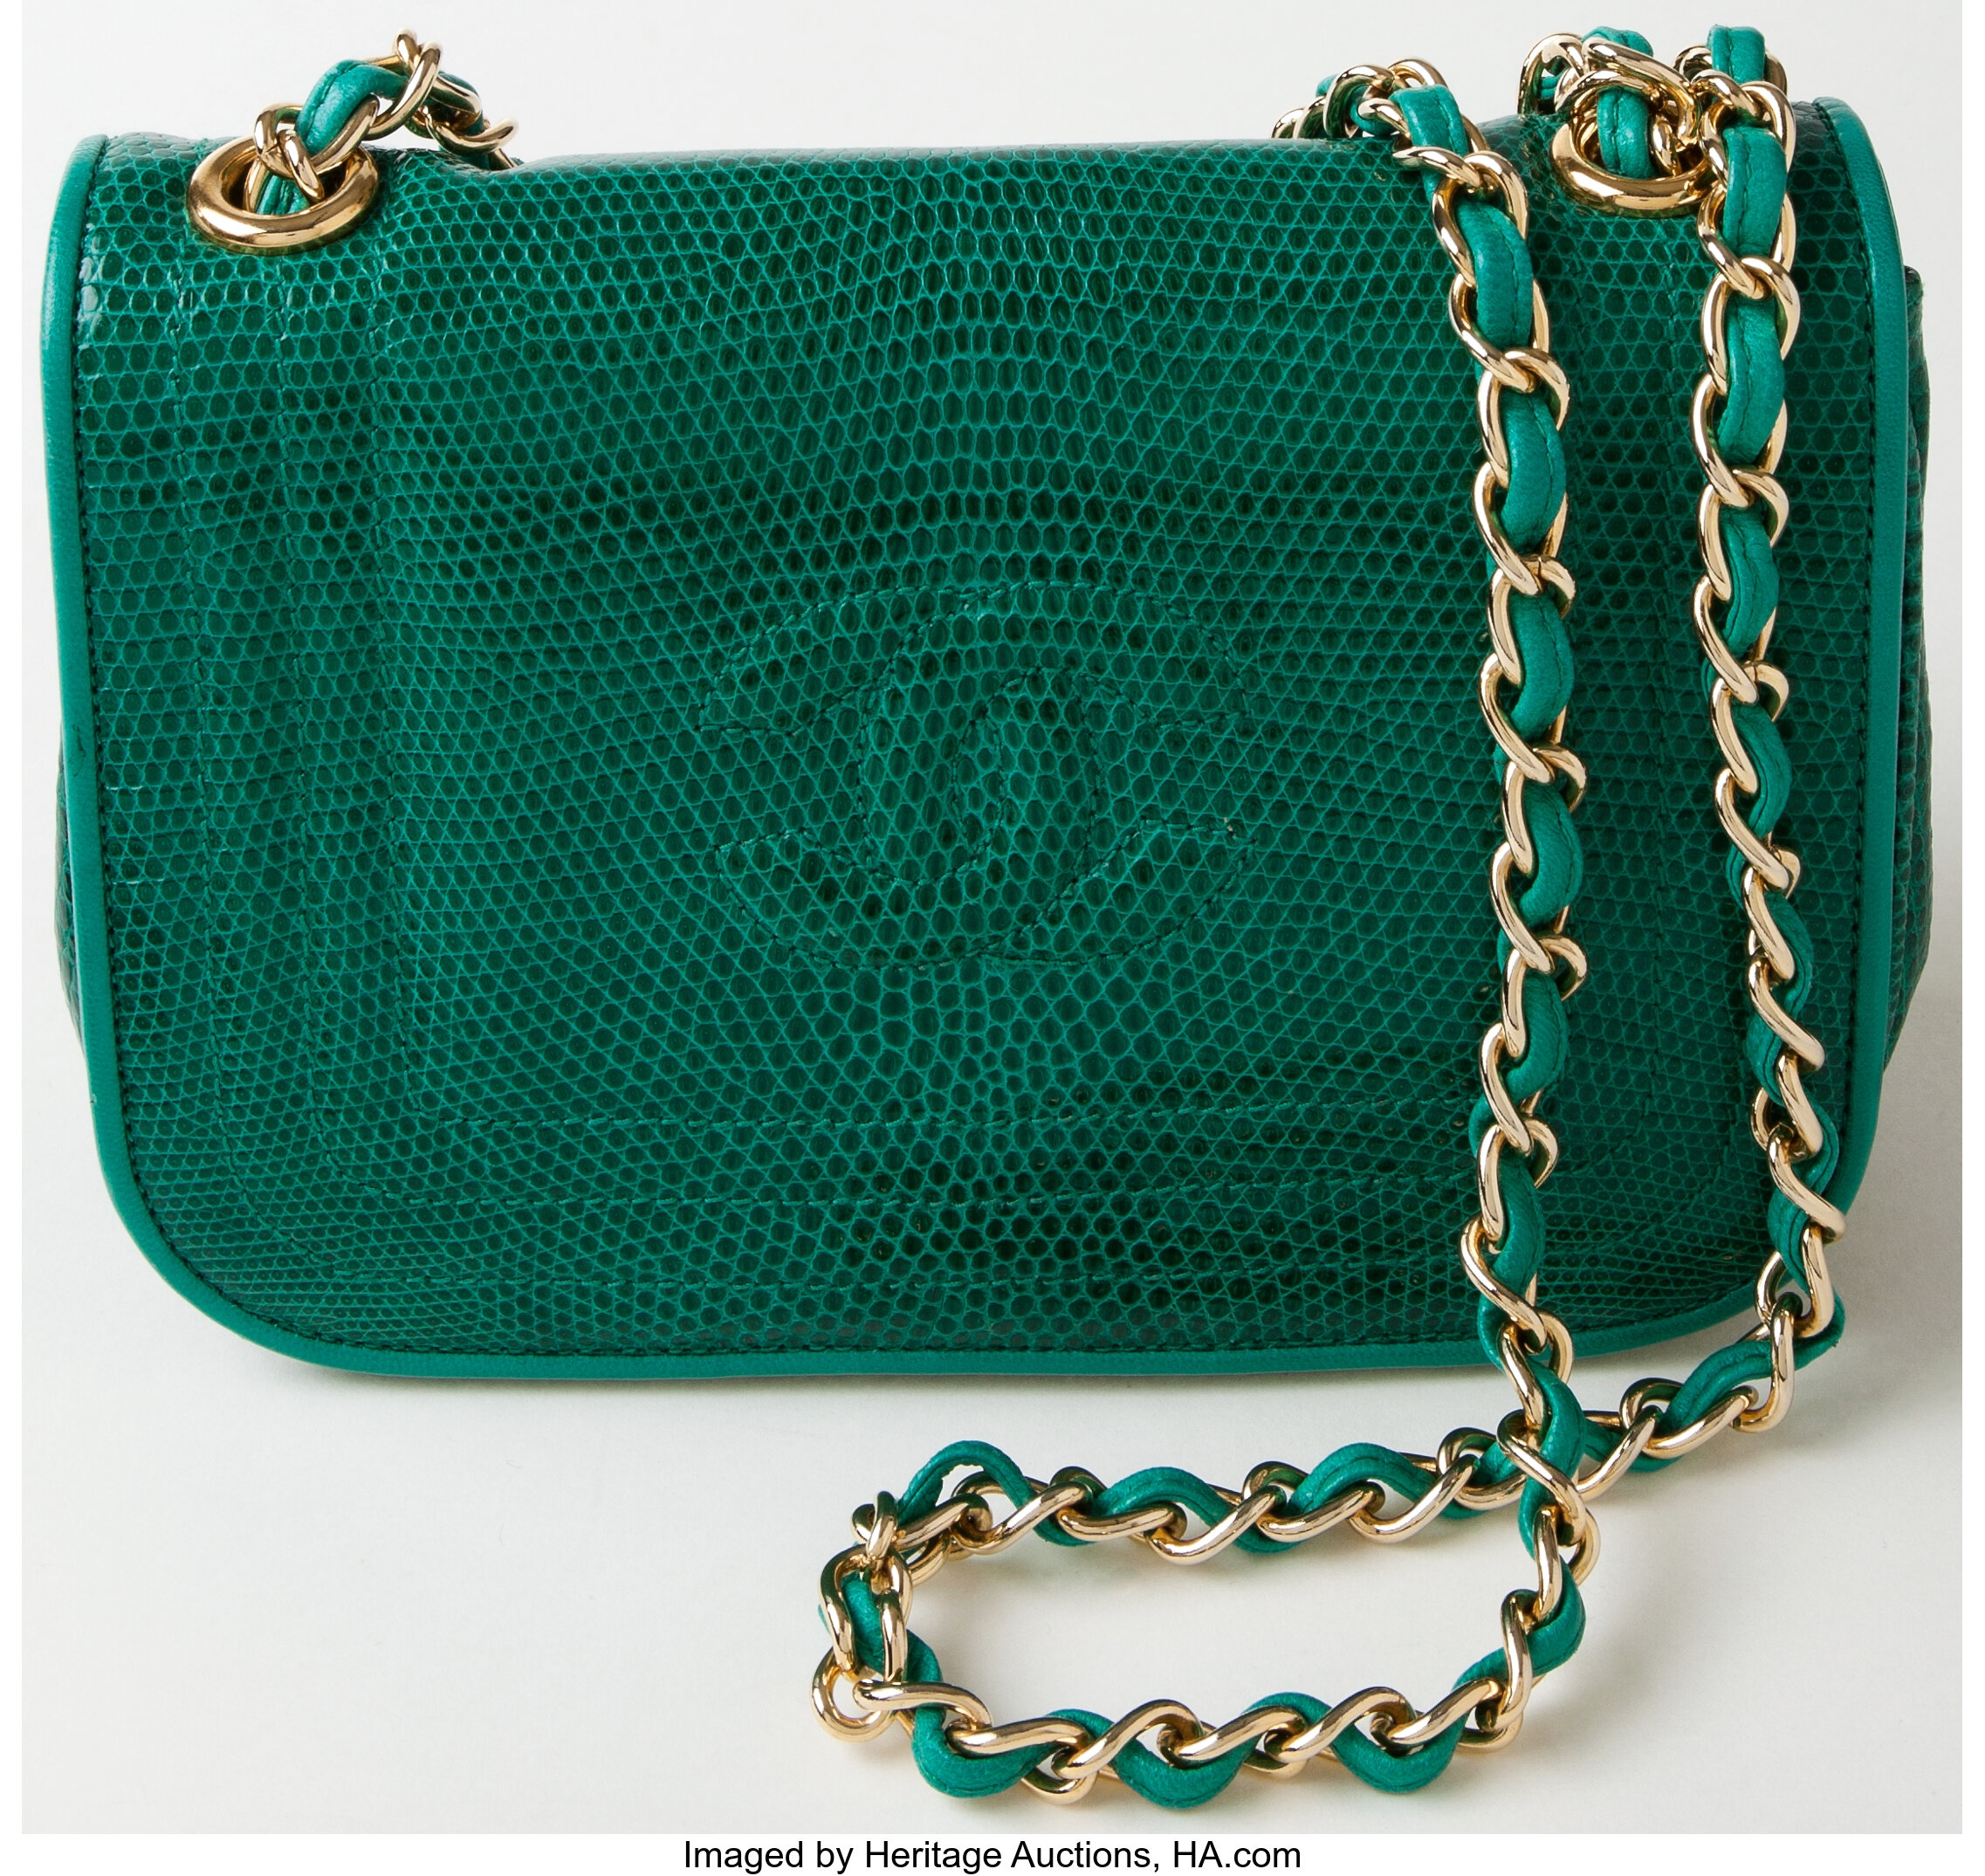 Chanel small green lizard leather flap bag GHW